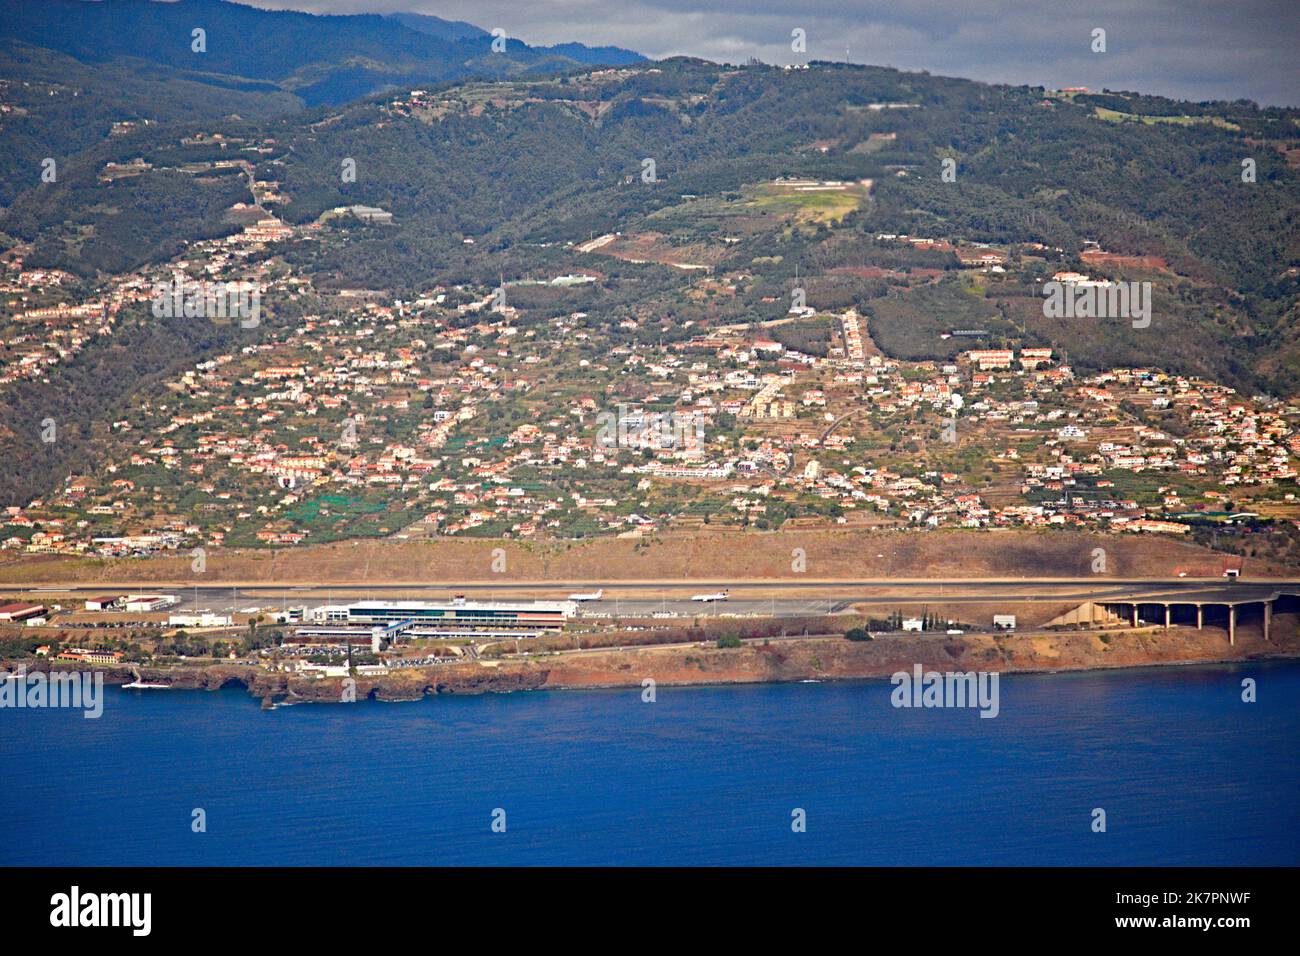 Portugal, Madeira, Funchal, airport, runway, aerial view, Stock Photo